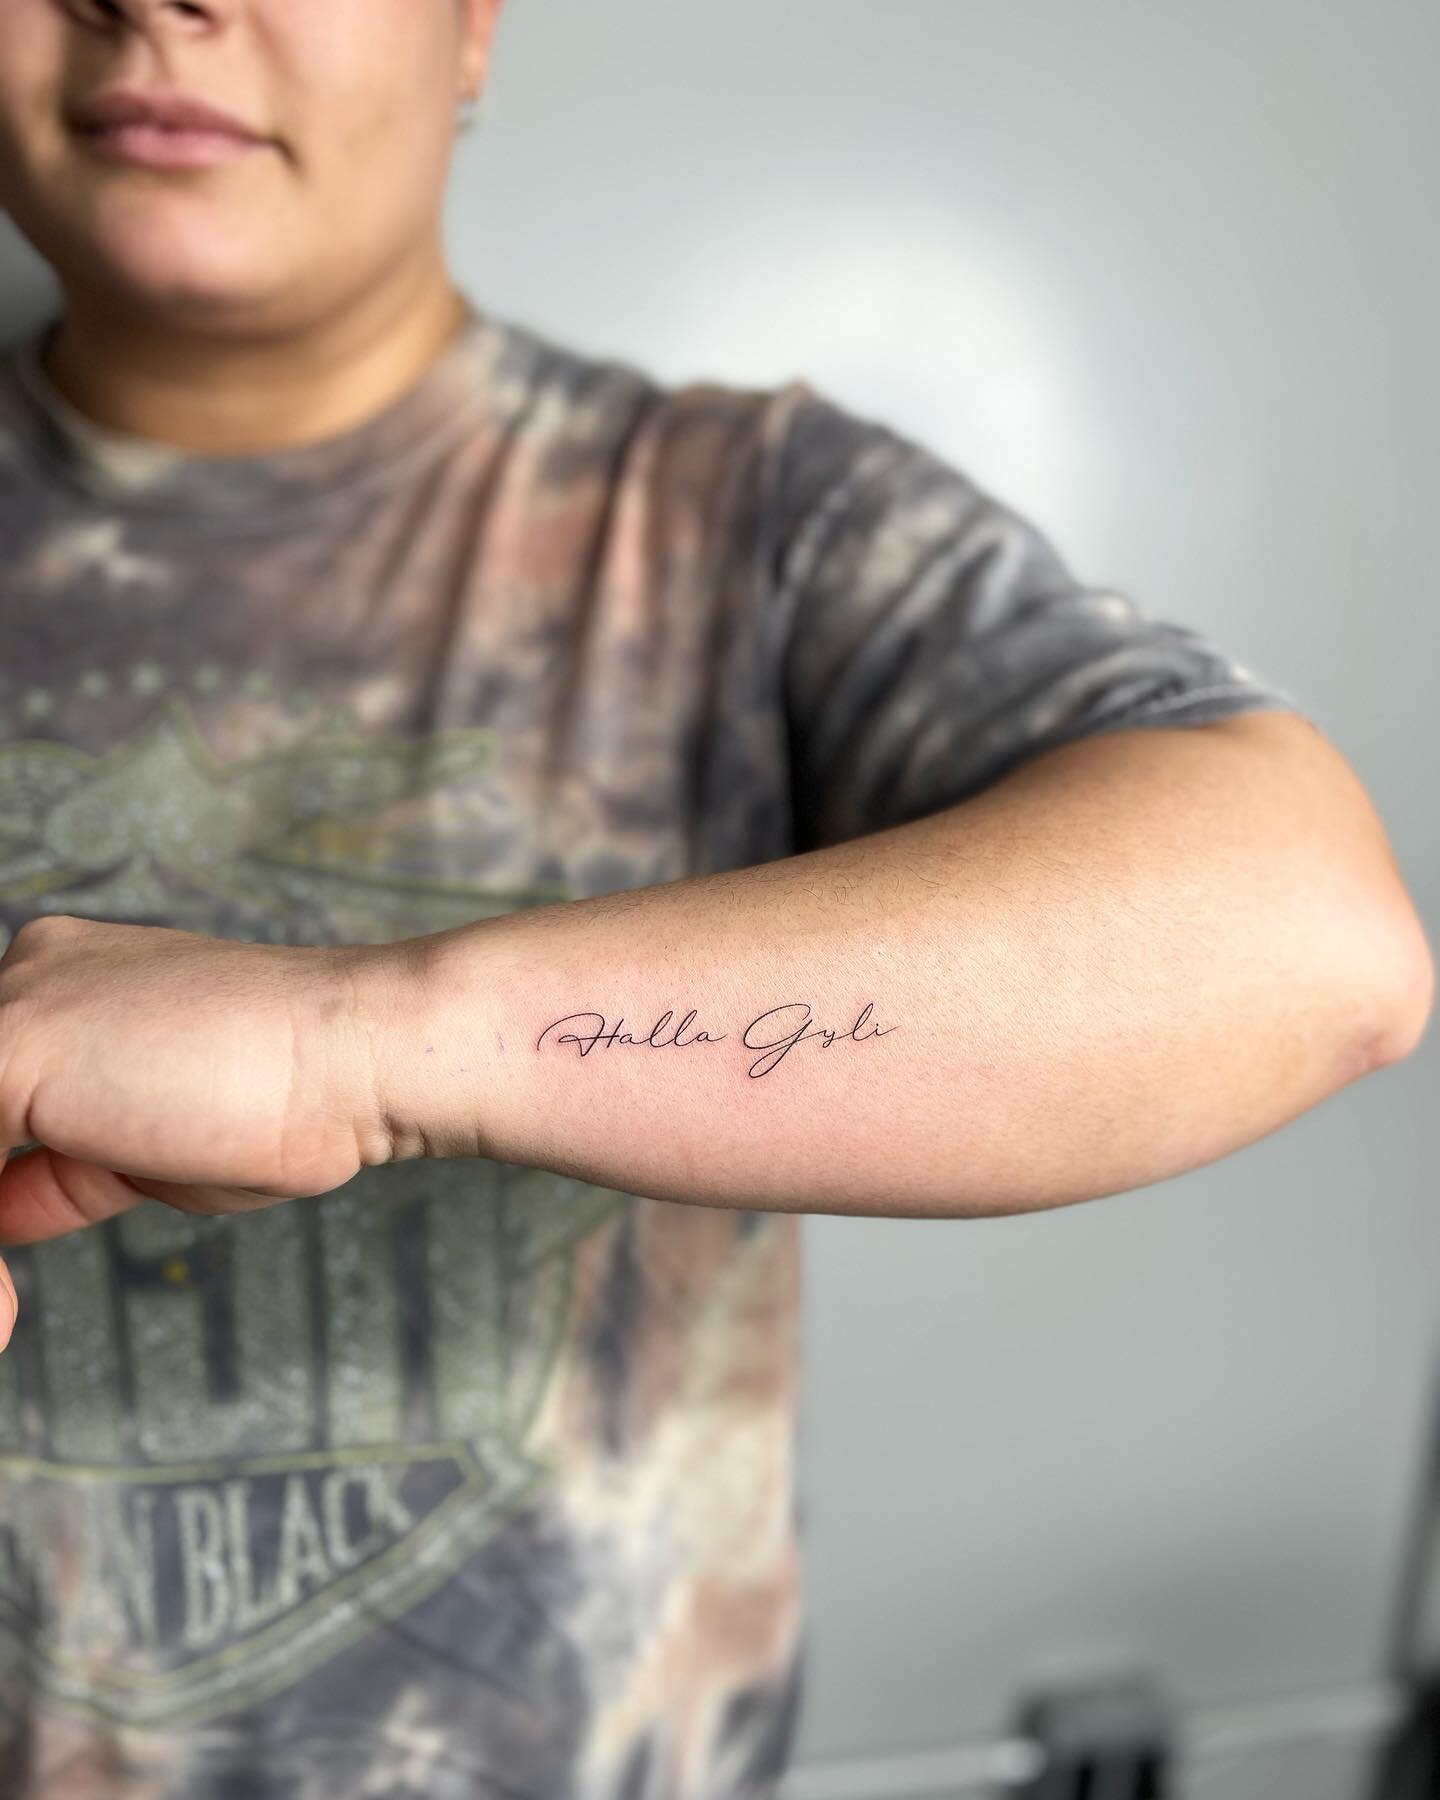 &ldquo;Its a memorial tattoo-a nickname that I call my aunt all the time, and today was her birthday.&rdquo; 
Thank you Donika for the trust and still coming back to me after 5 years.
#memorialtattoo #letteringtattoo #wristtattoo #finelinetattoo #fin